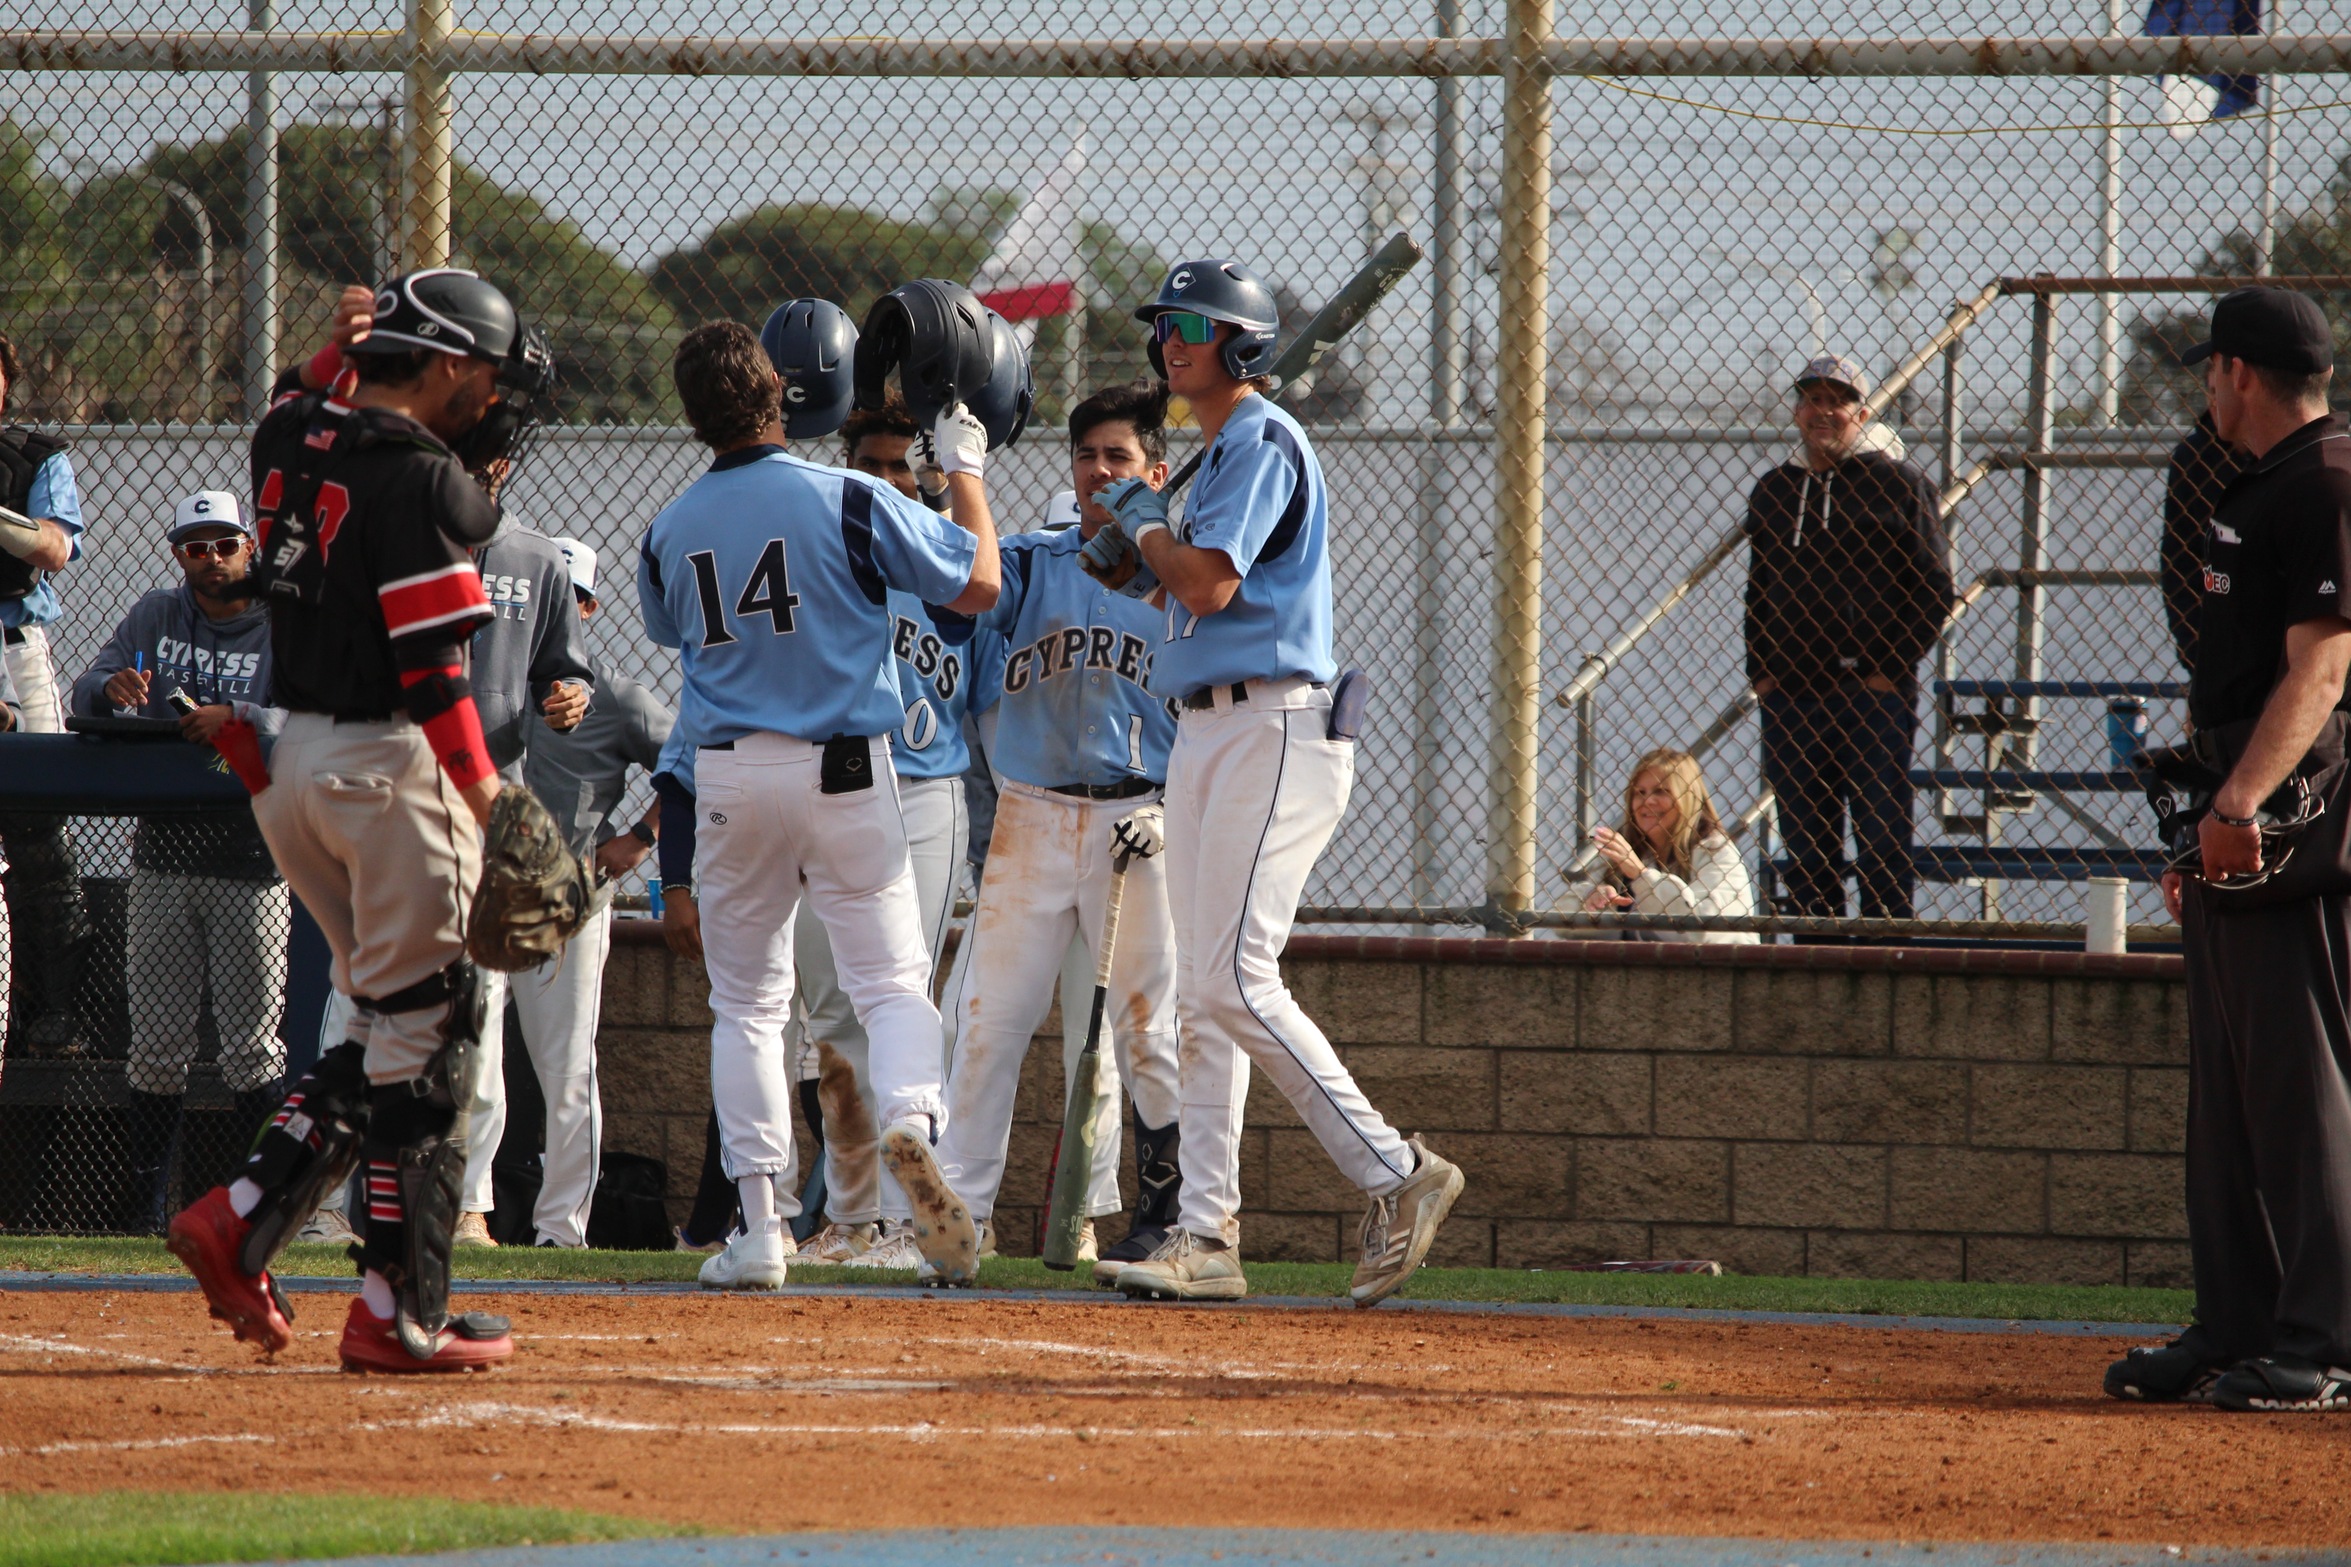 Chargers Win it in Walk-Off Fashion Versus Chaffey